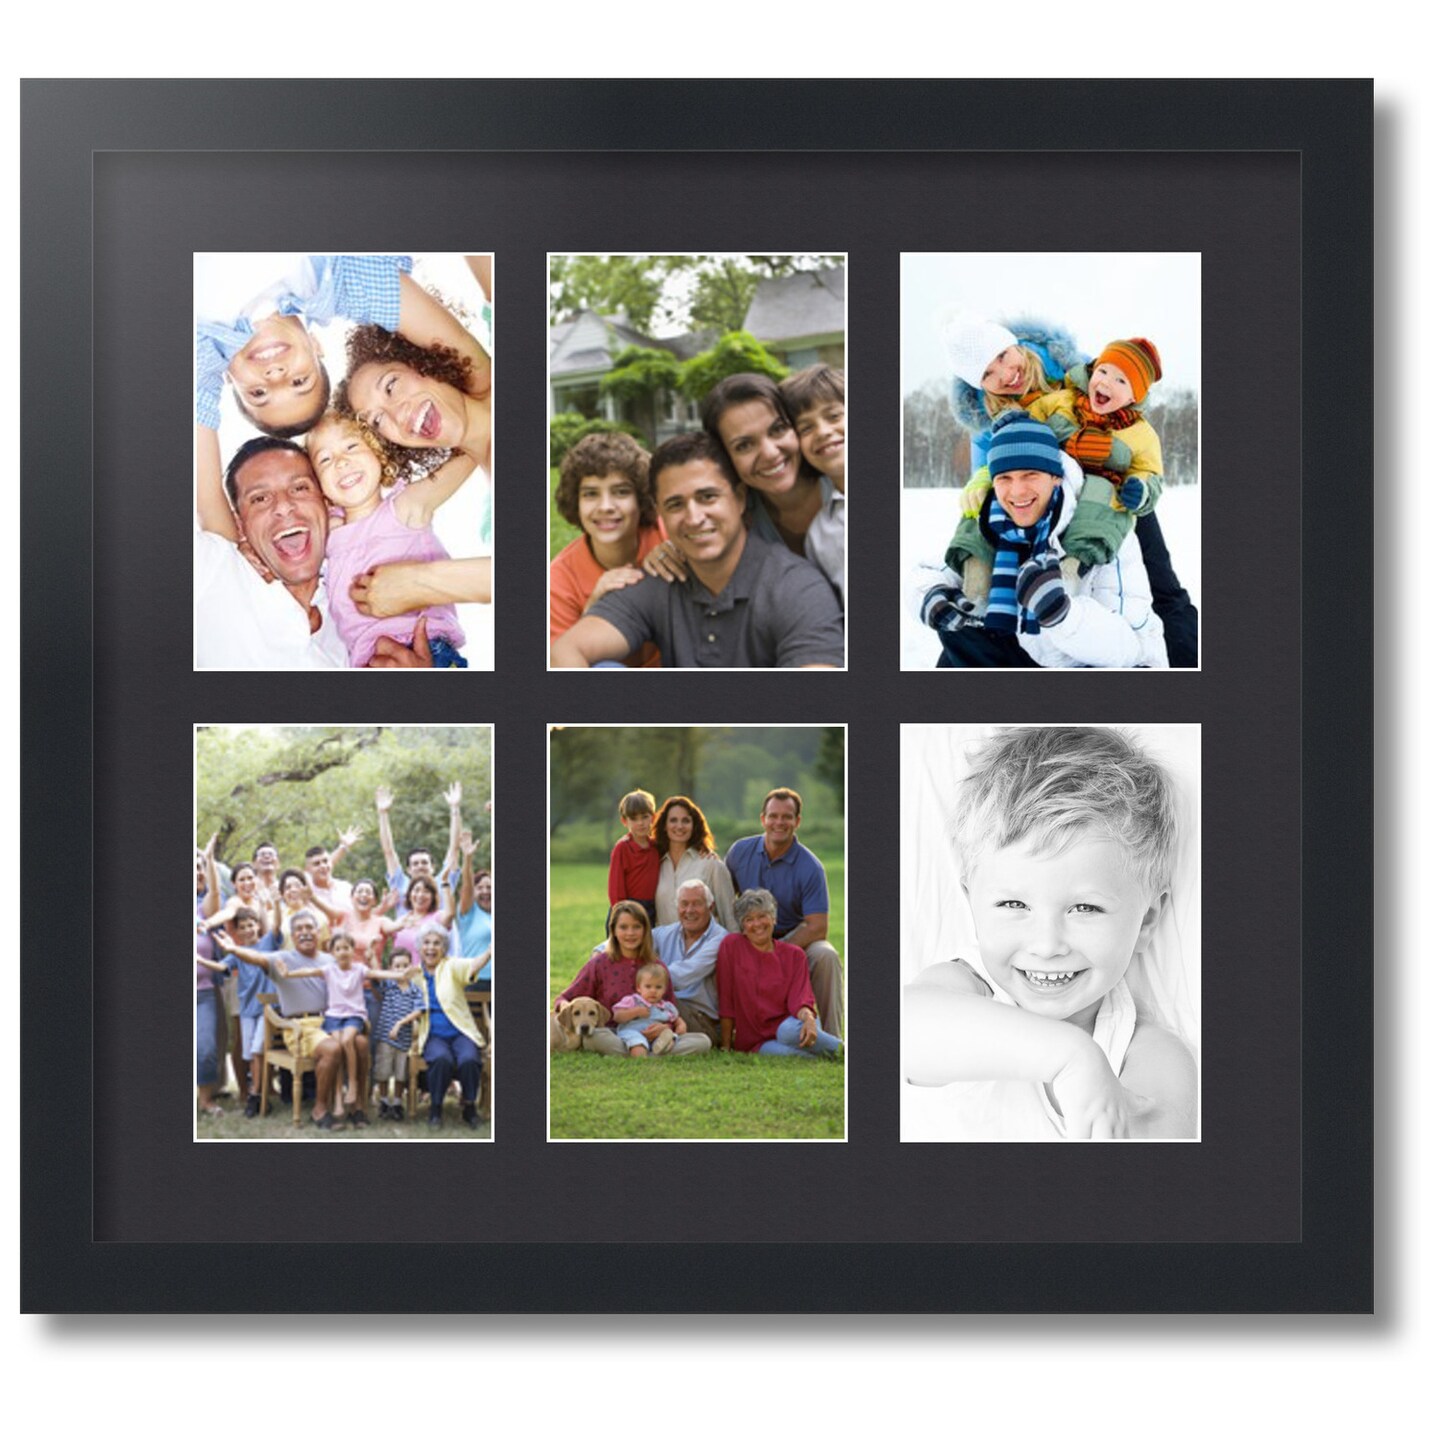 ArtToFrames Collage Photo Picture Frame with 6 - 5x7 inch Openings, Framed in Black with Over 62 Mat Color Options and Plexi Glass (CSM-3926-2041)